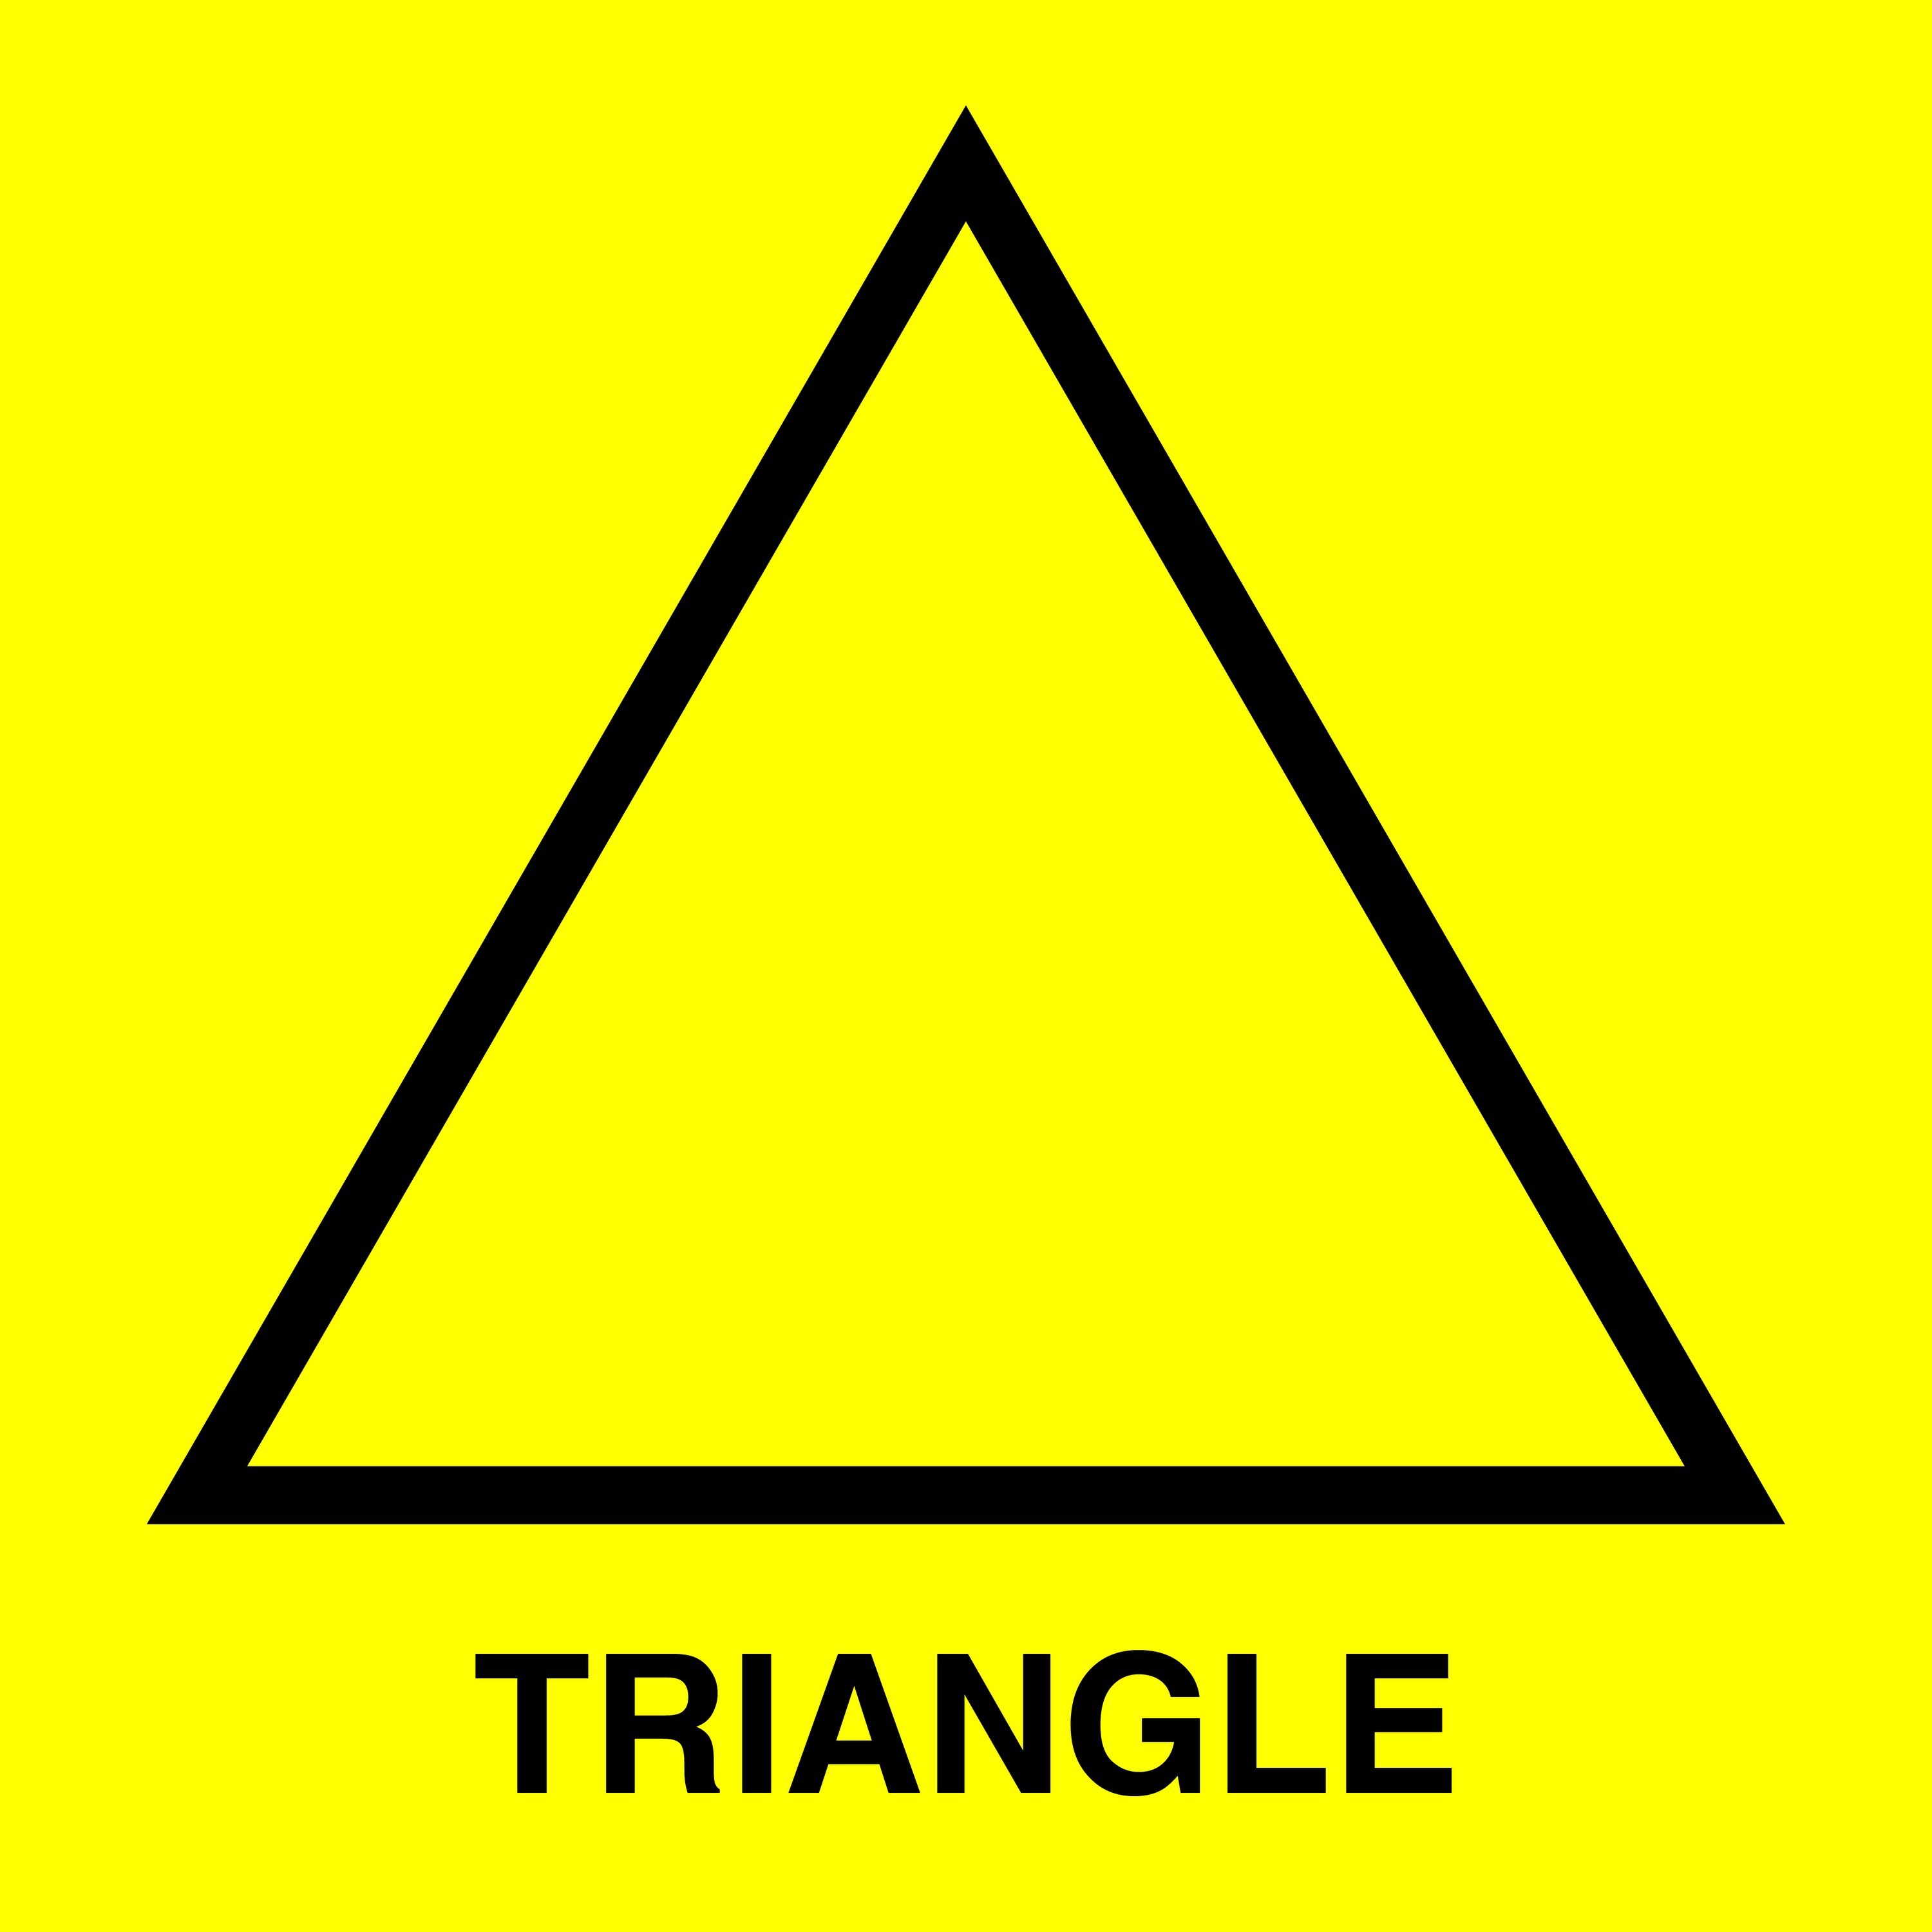 Triangle Shapes For Kids - ClipArt Best